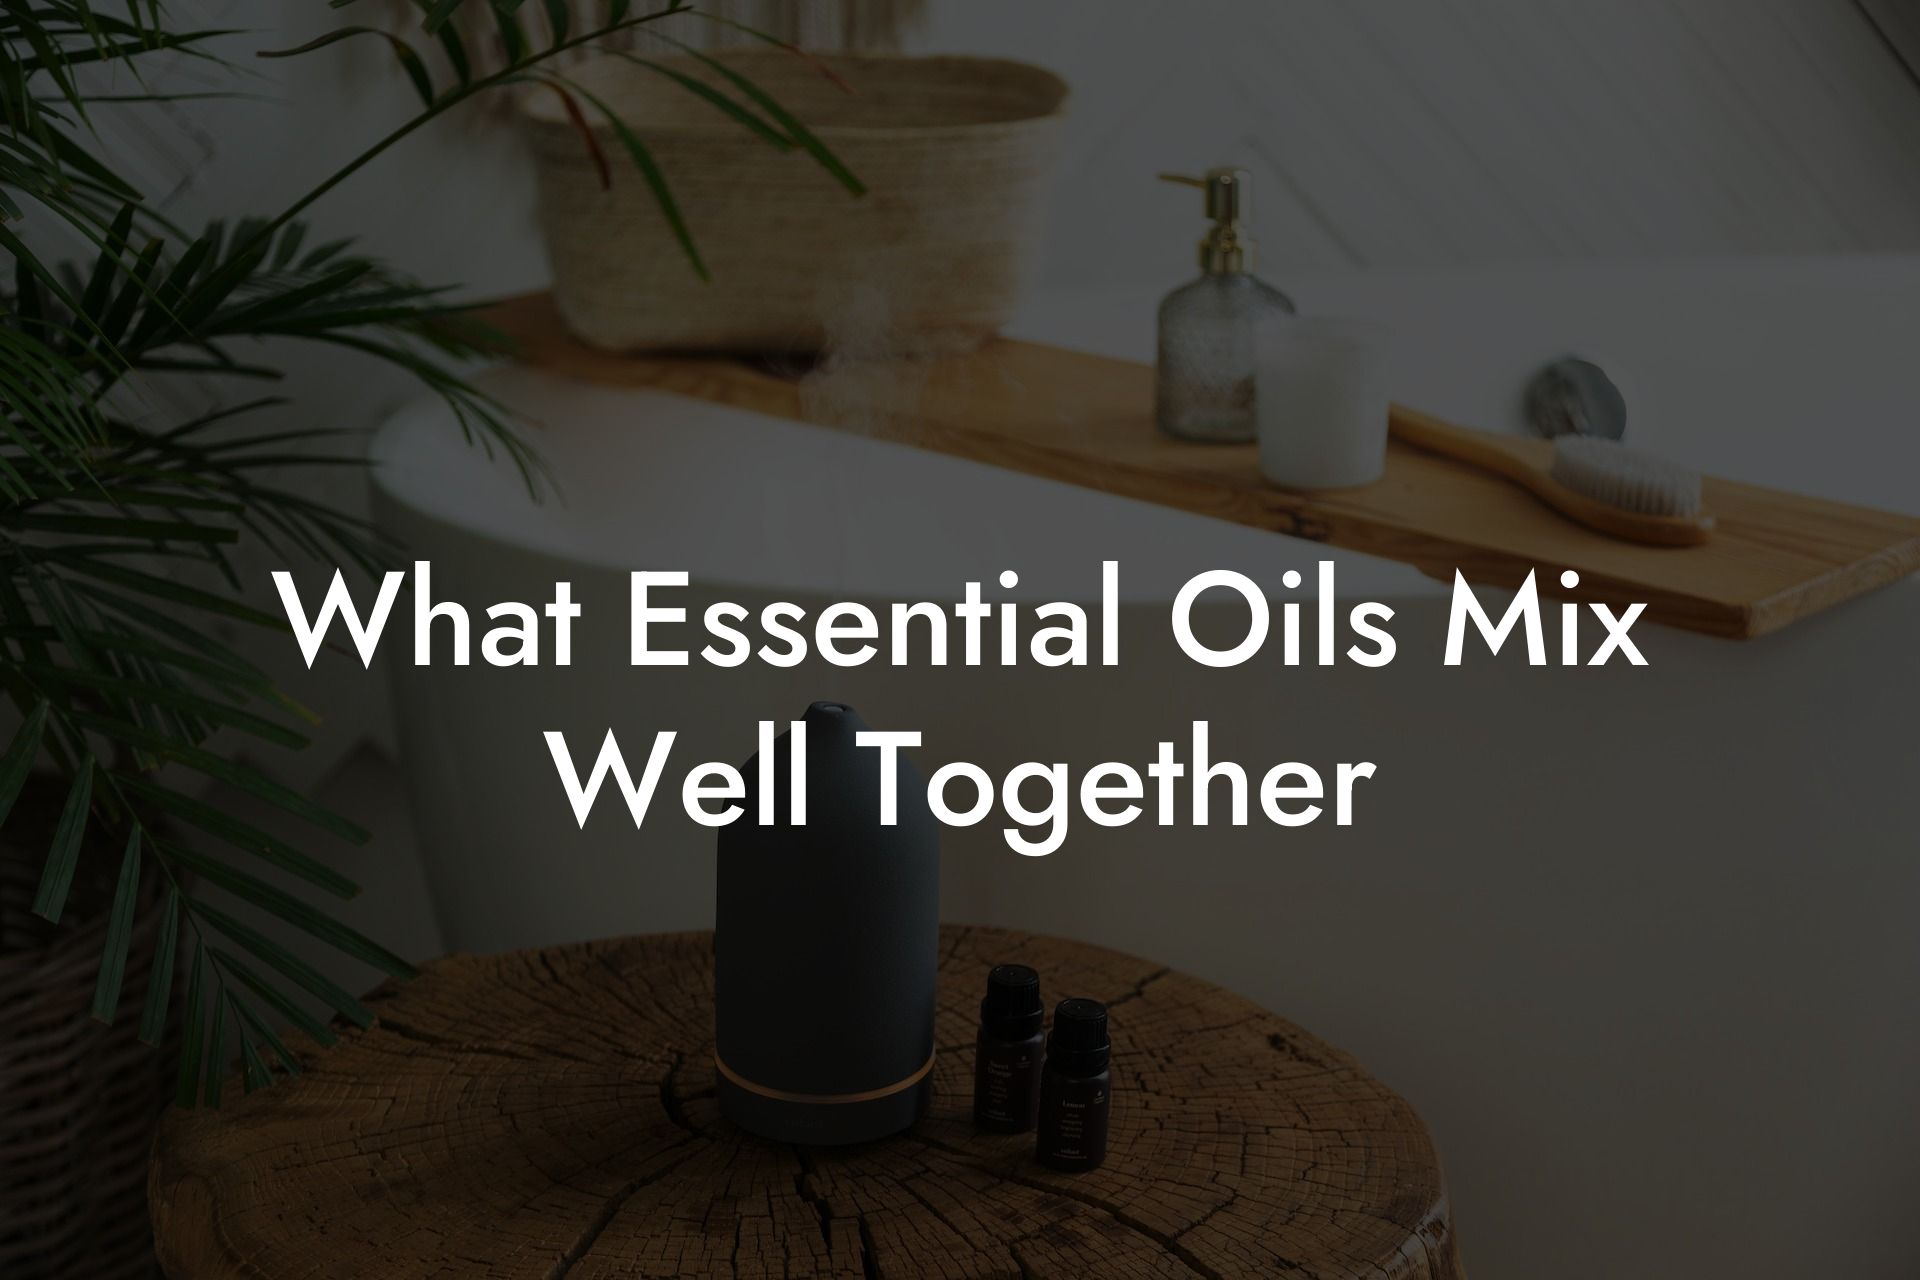 What Essential Oils Mix Well Together